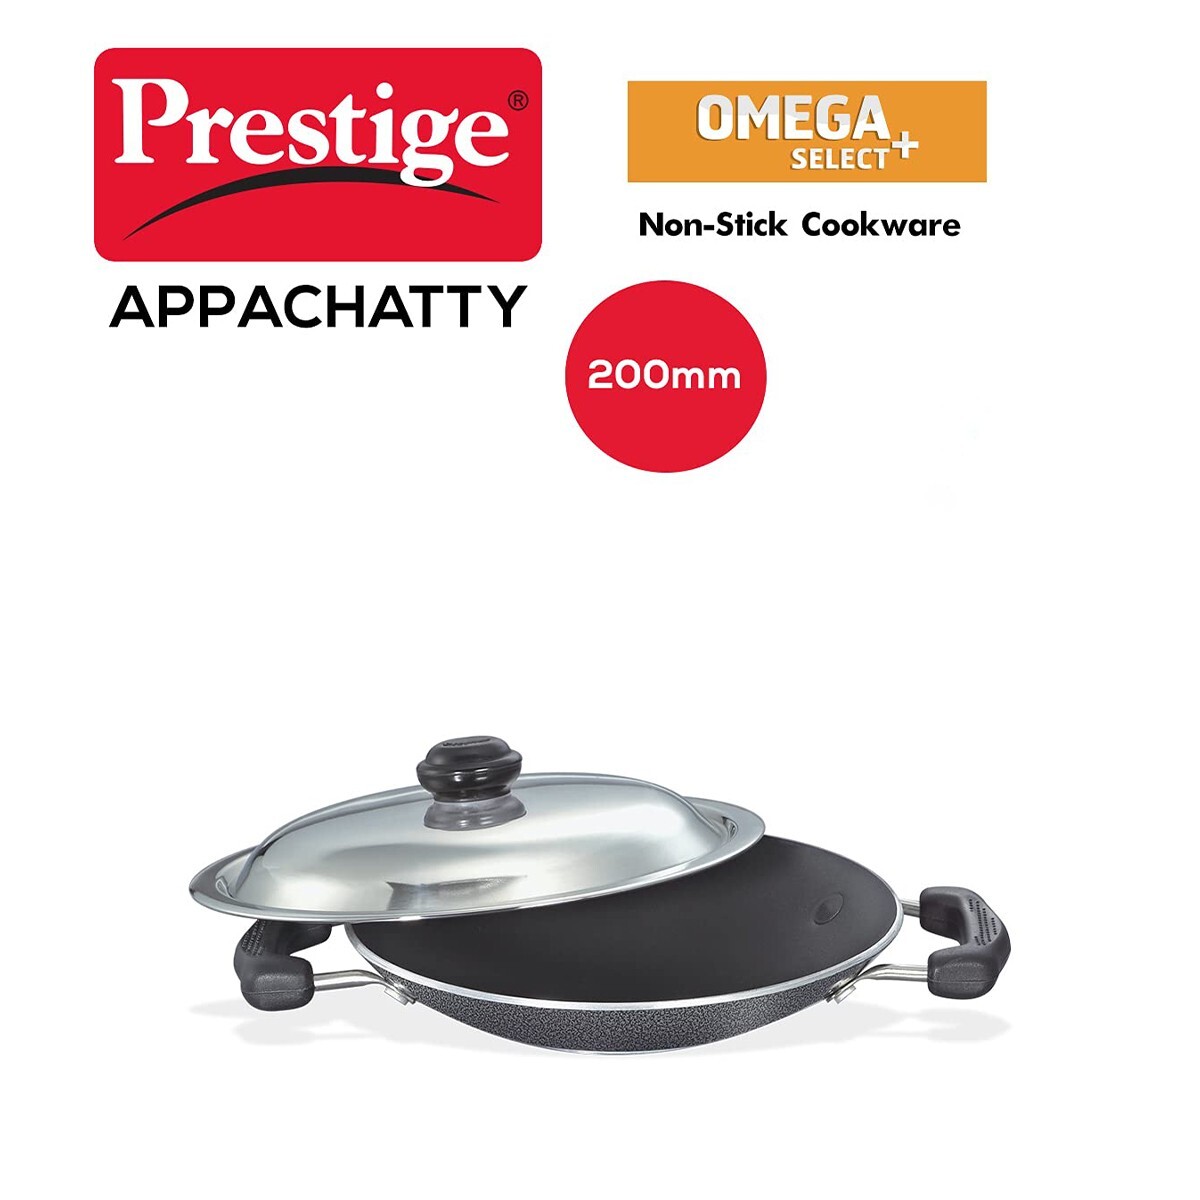 Prestige Omega Select Plus Non-stick Appachatty with Stainless Steel Lid, 20cm